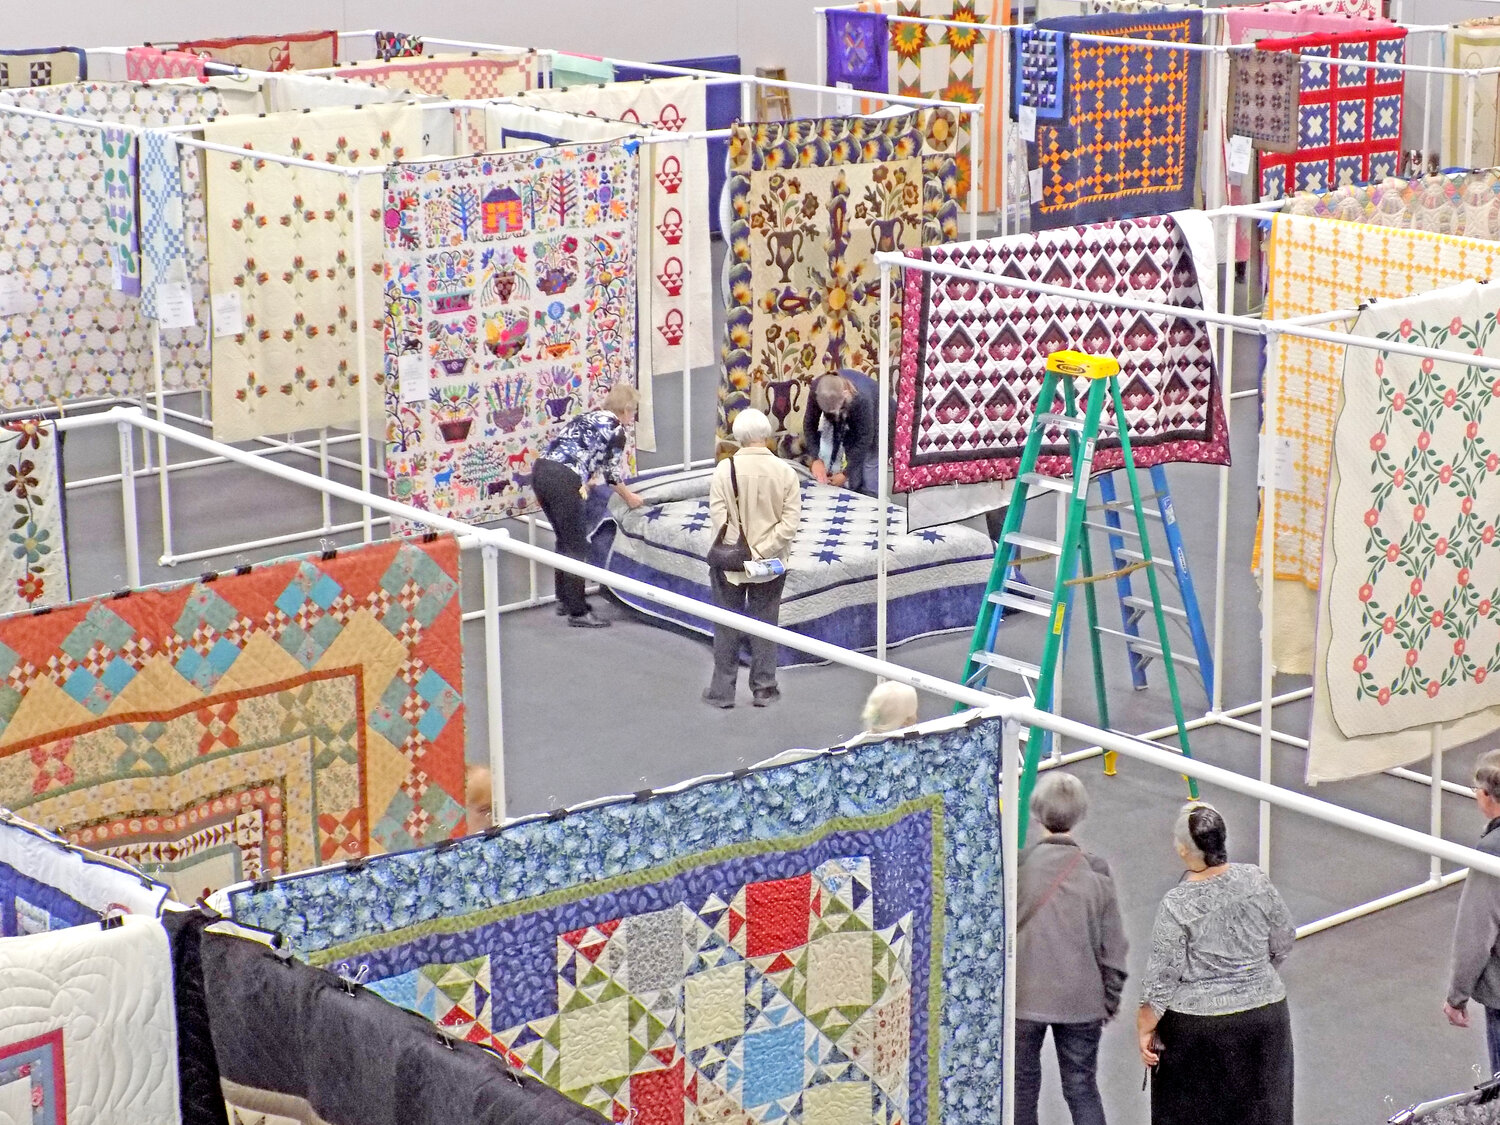 Attendees come from almost all 48 continental states to see and buy quilts in Kalona.